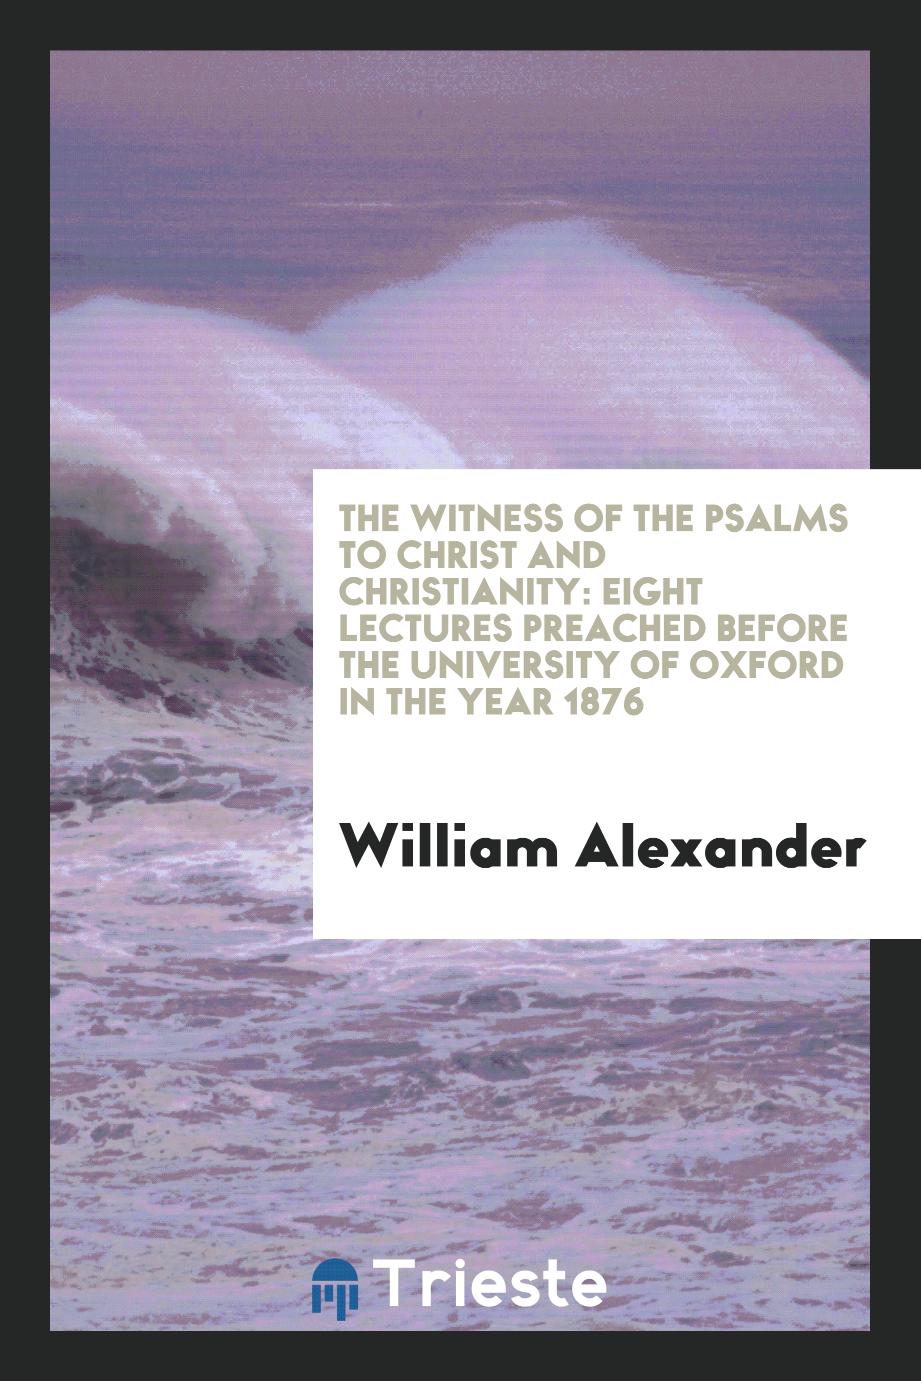 The Witness of the Psalms to Christ and Christianity: Eight Lectures Preached Before the University of Oxford in the Year 1876